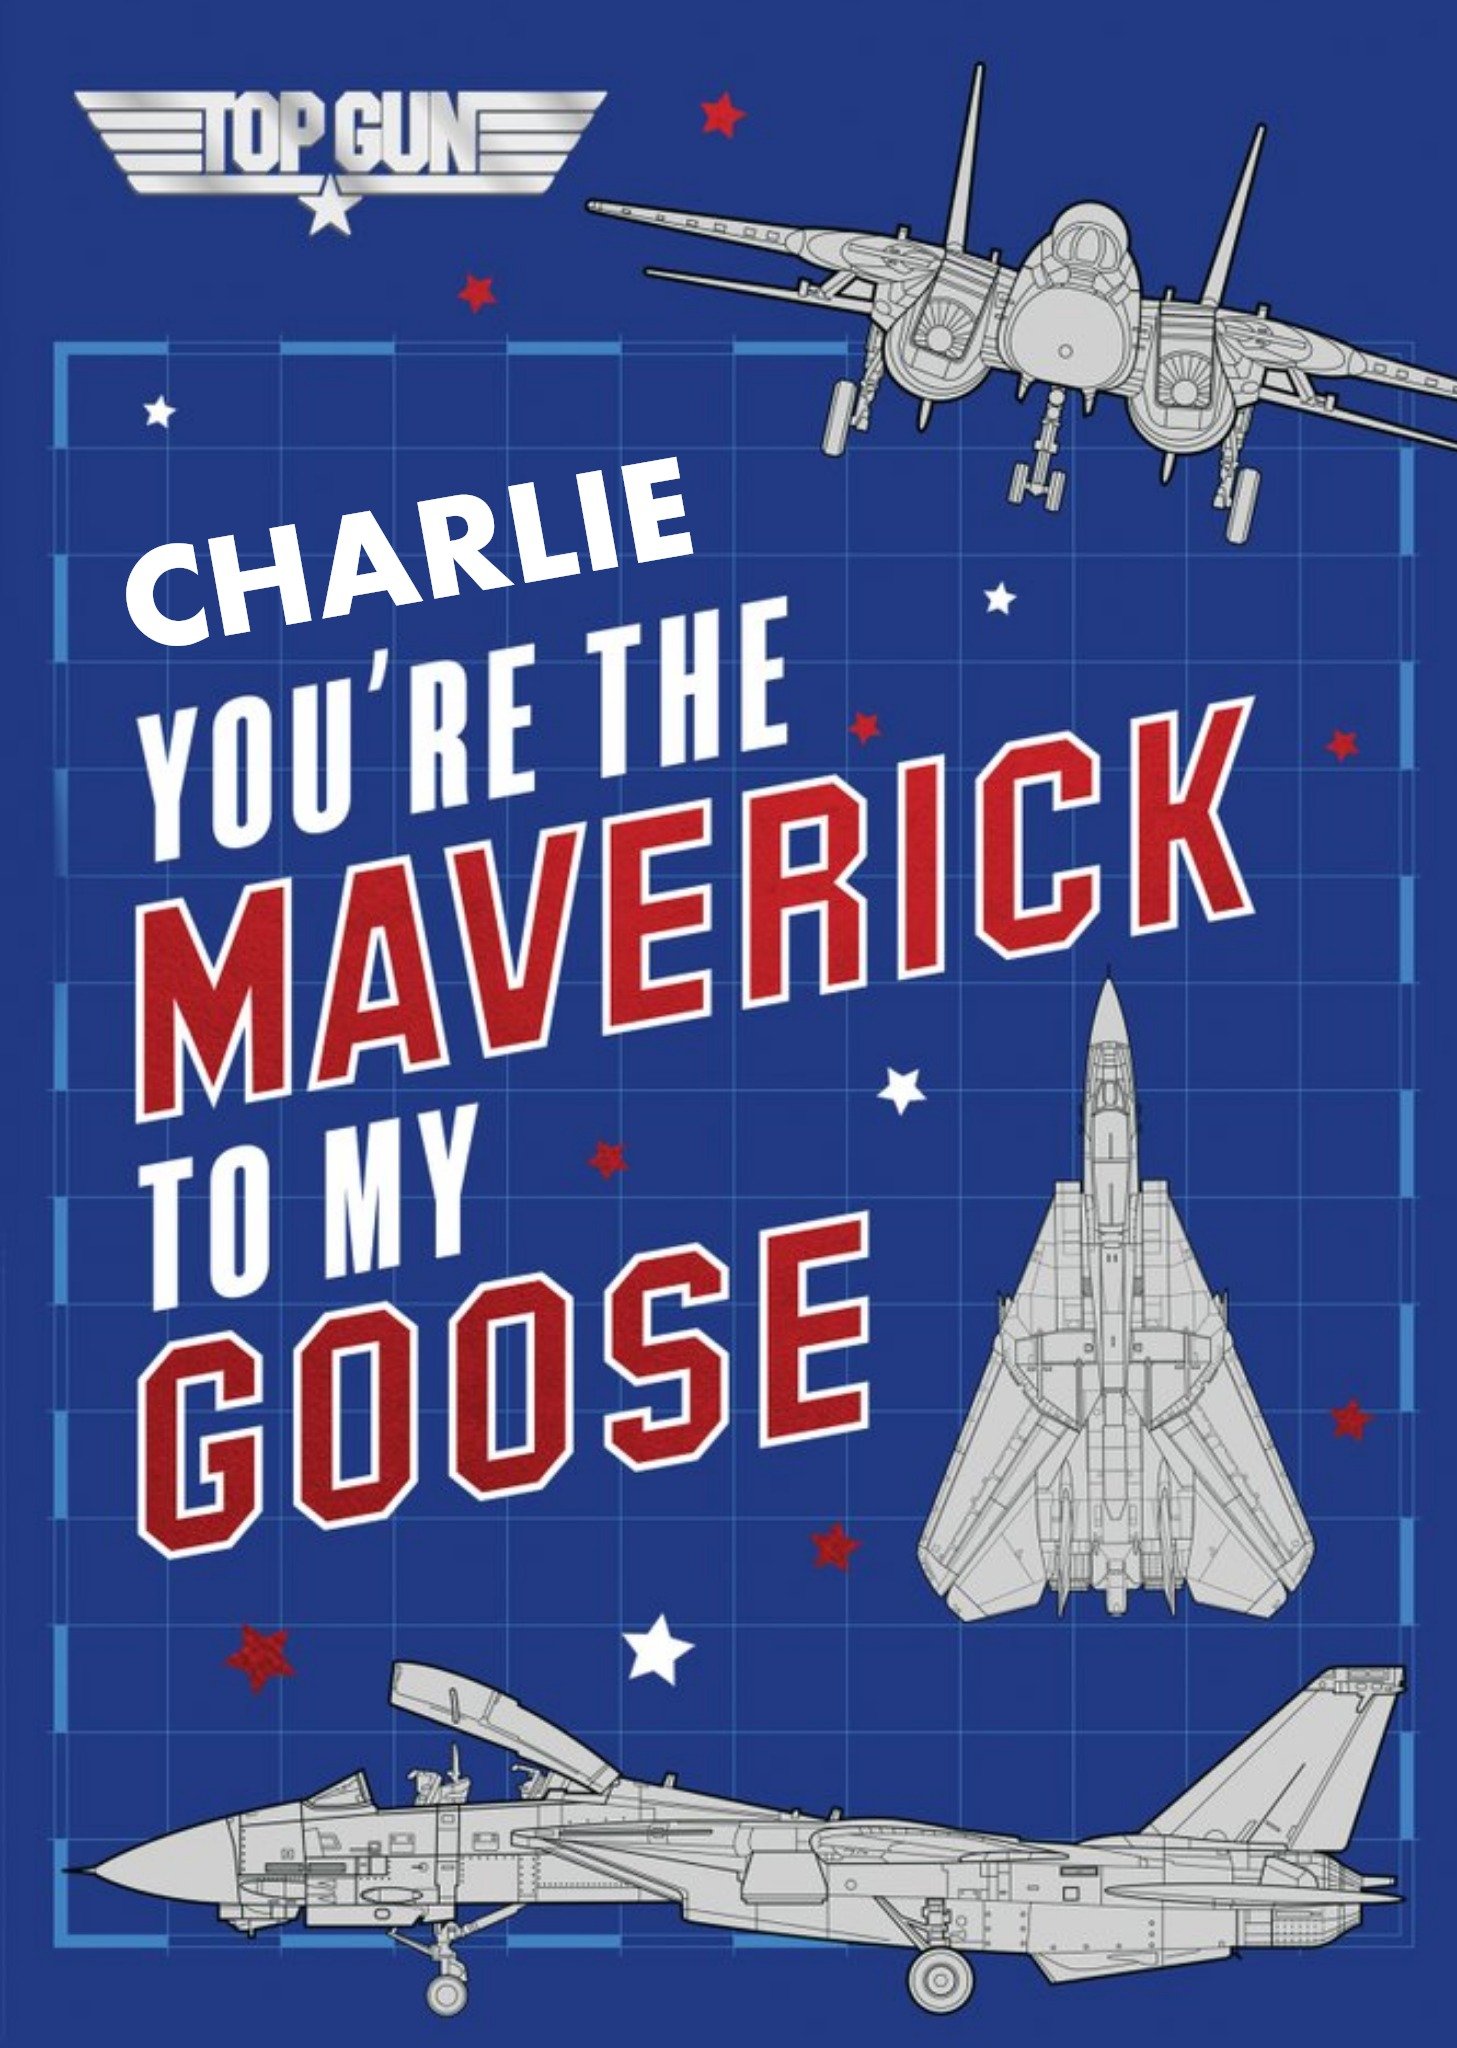 Other Top Gun You're The Maverick To My Goose Birthday Card, Large